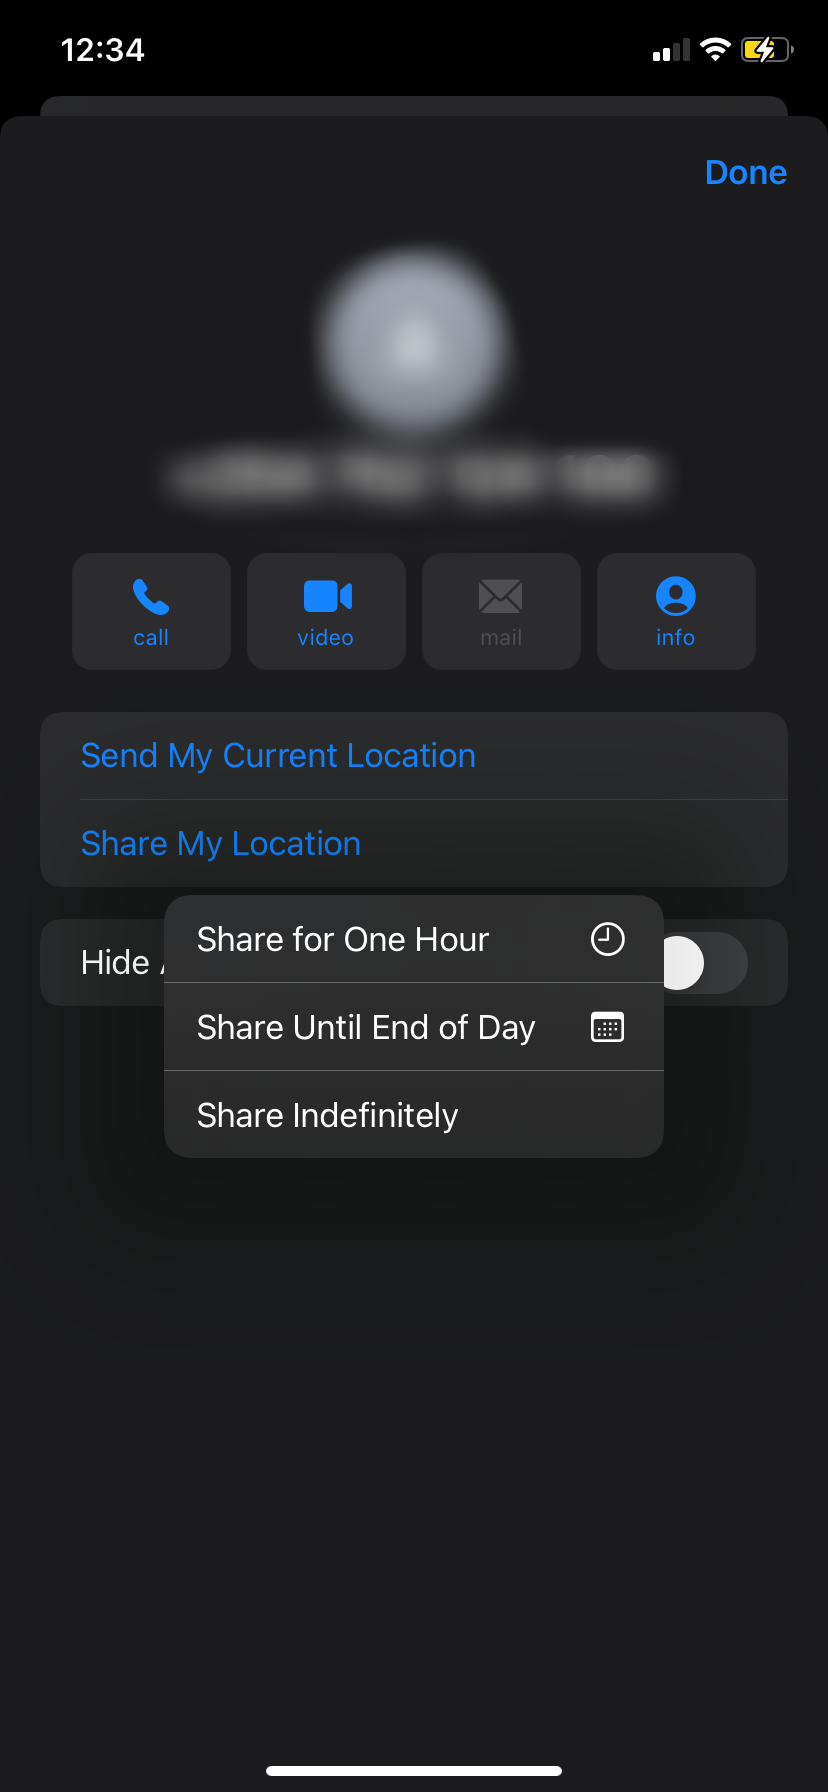 Share my location options in iMessage